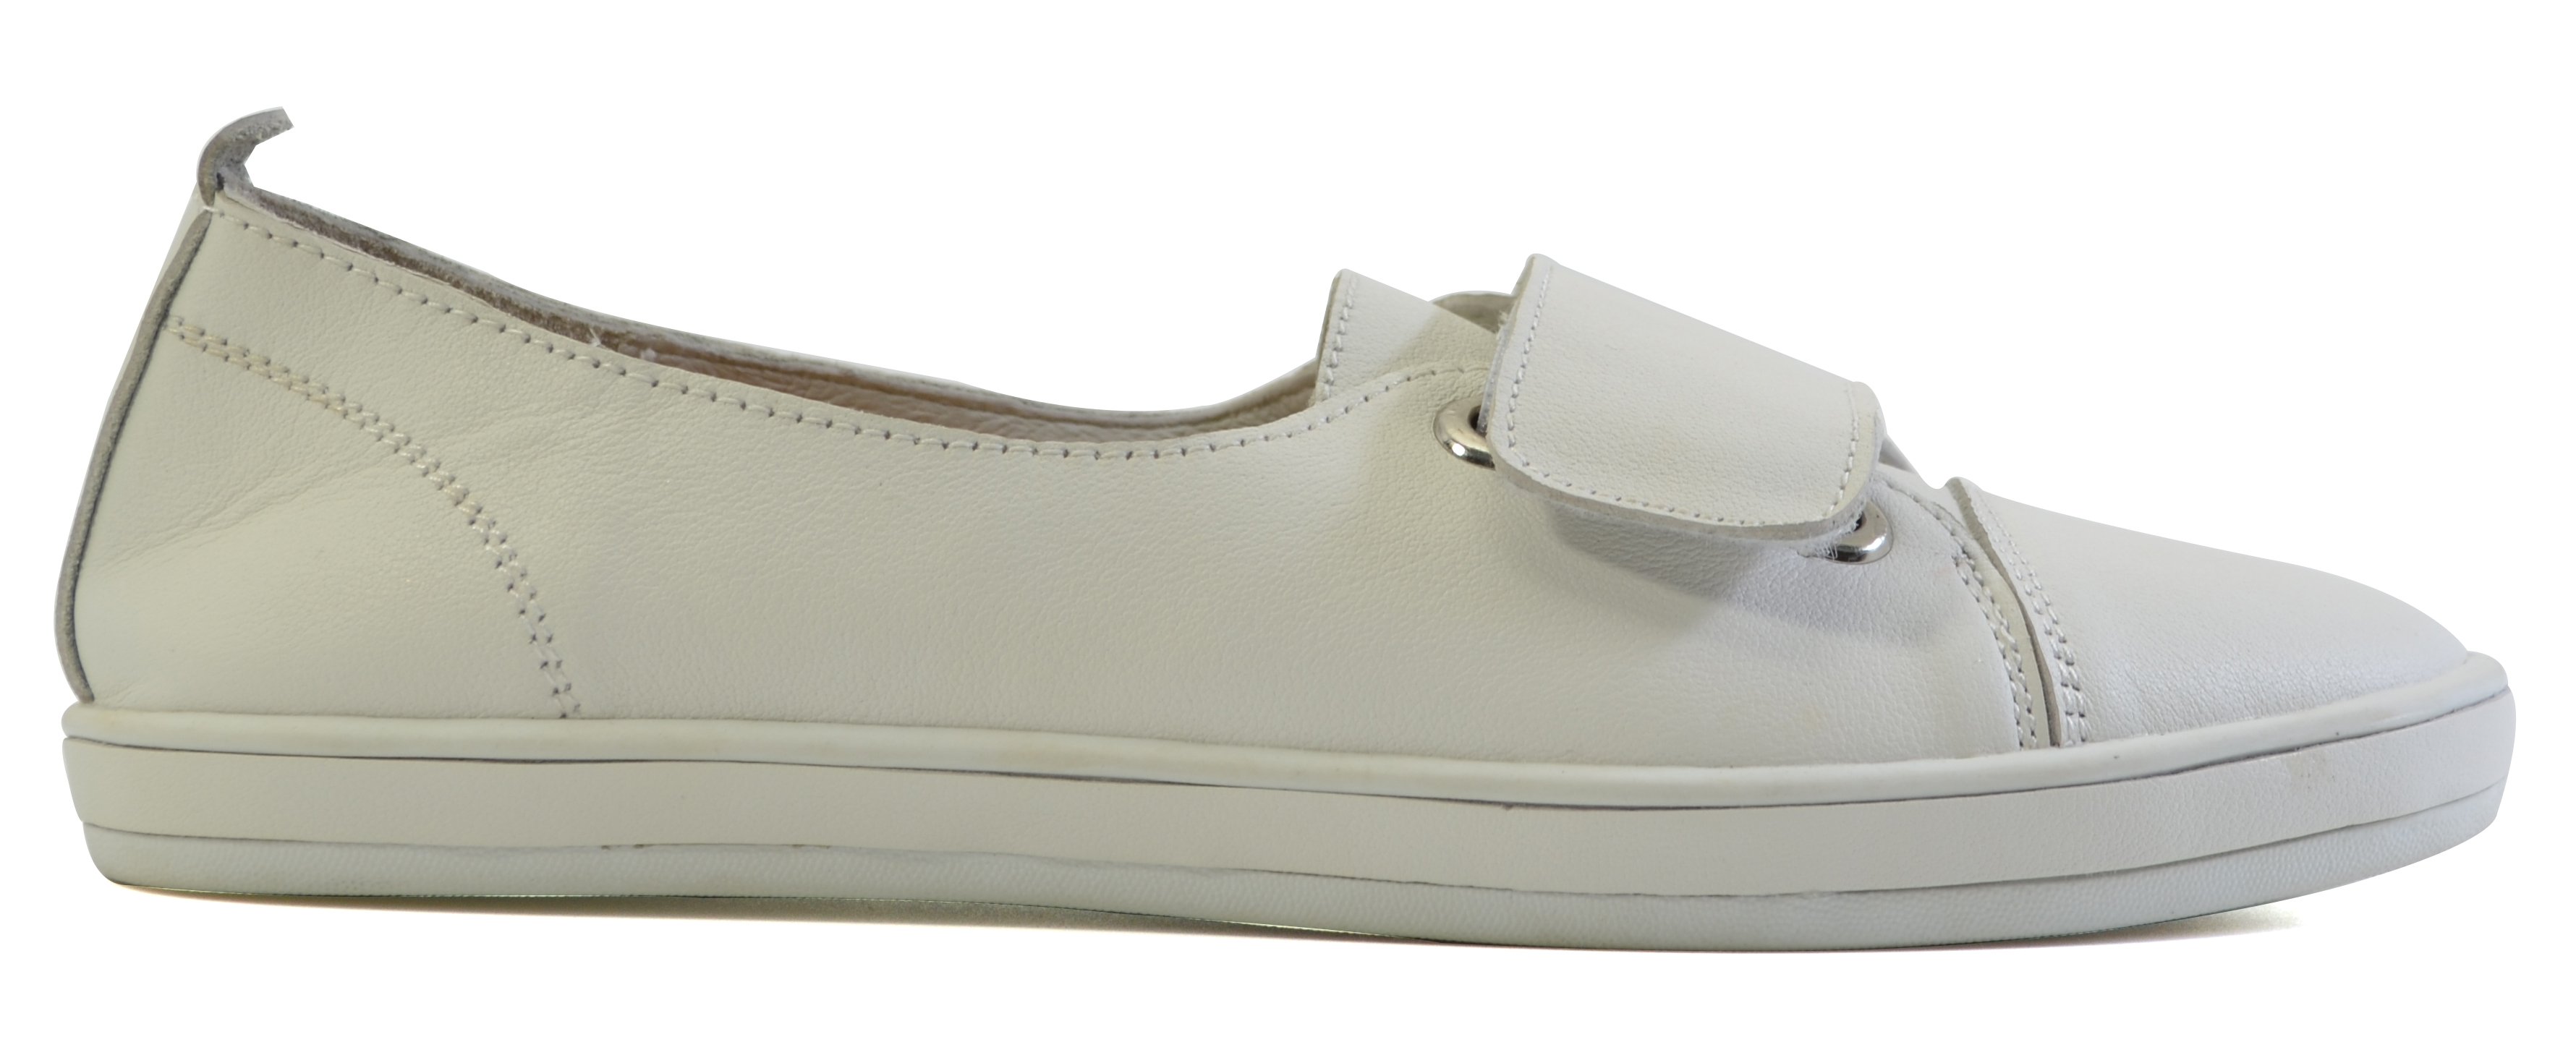 GALE-WHITE - Traffic Footwear Women Shoes Collection - Boston Babe ...